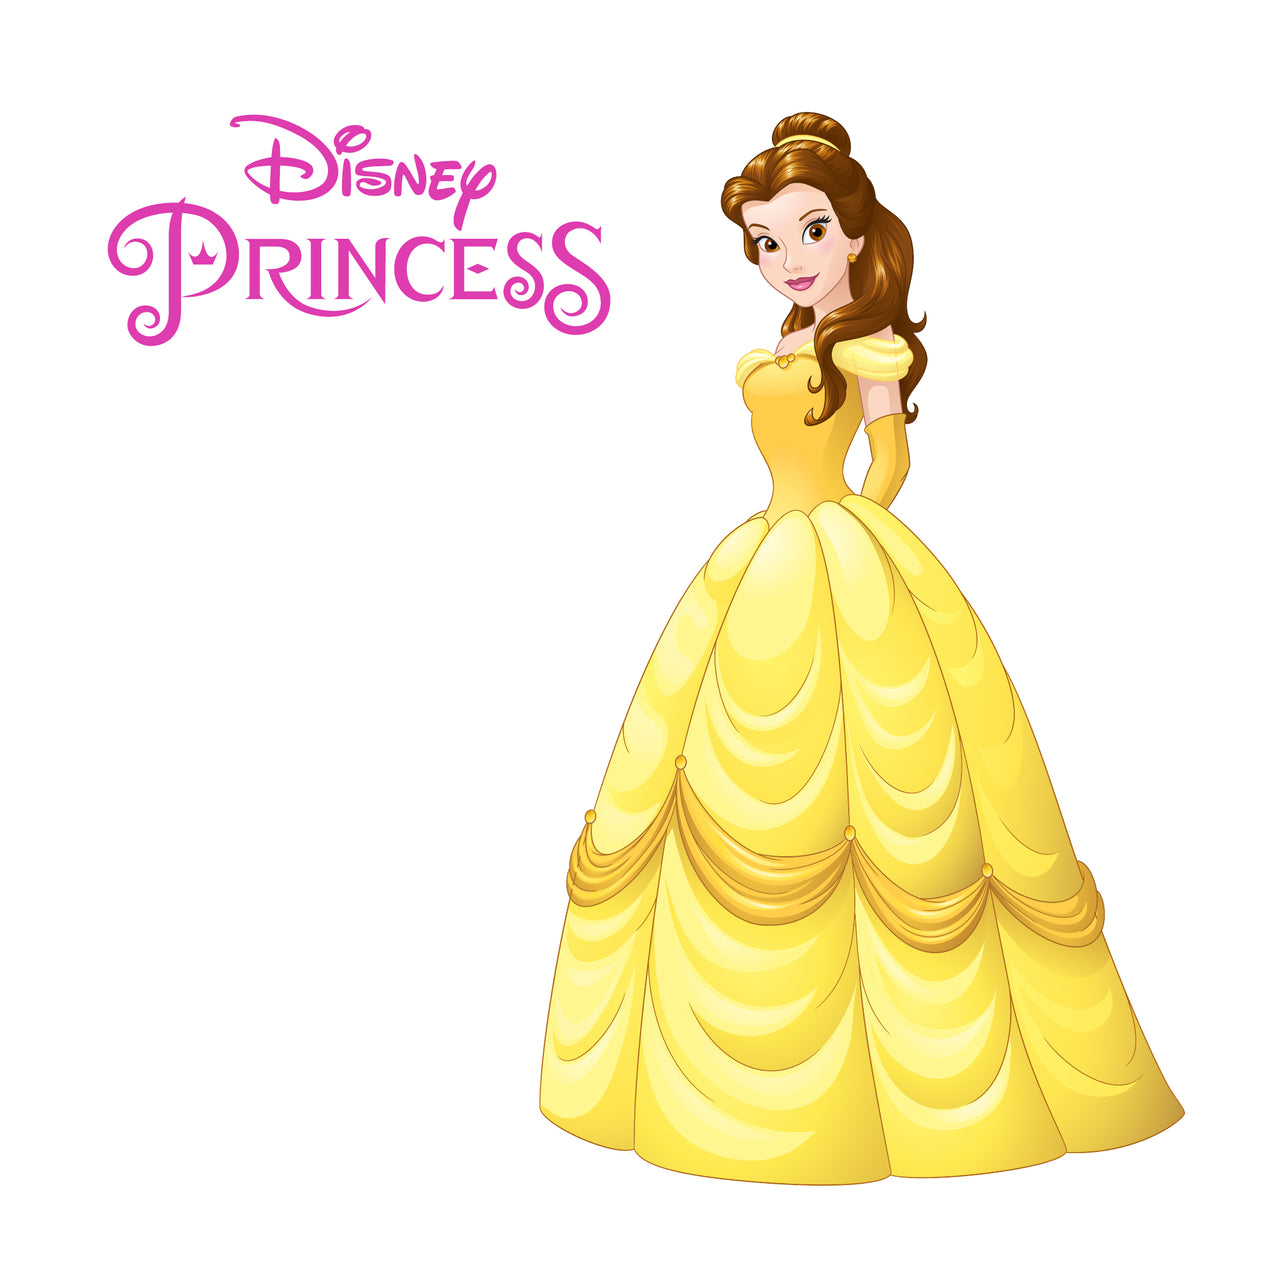 Belle Princess Free Clip Art PNG Image | Gallery Yopriceville - Clip ...